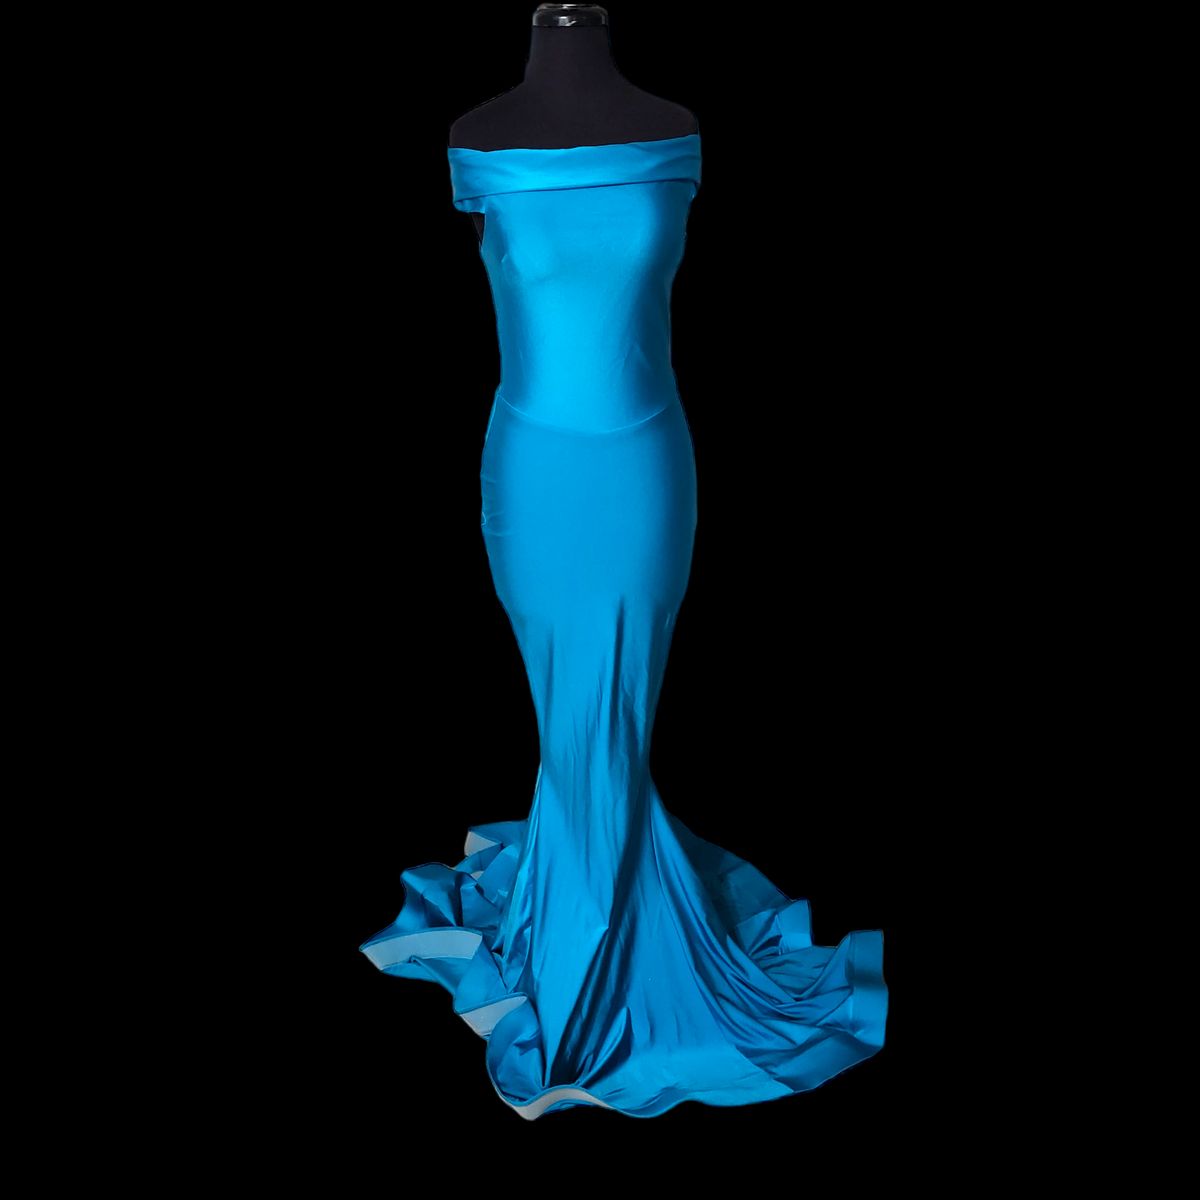 Style 6204H Jessica Angel Size 8 Satin Blue Mermaid Dress on Queenly